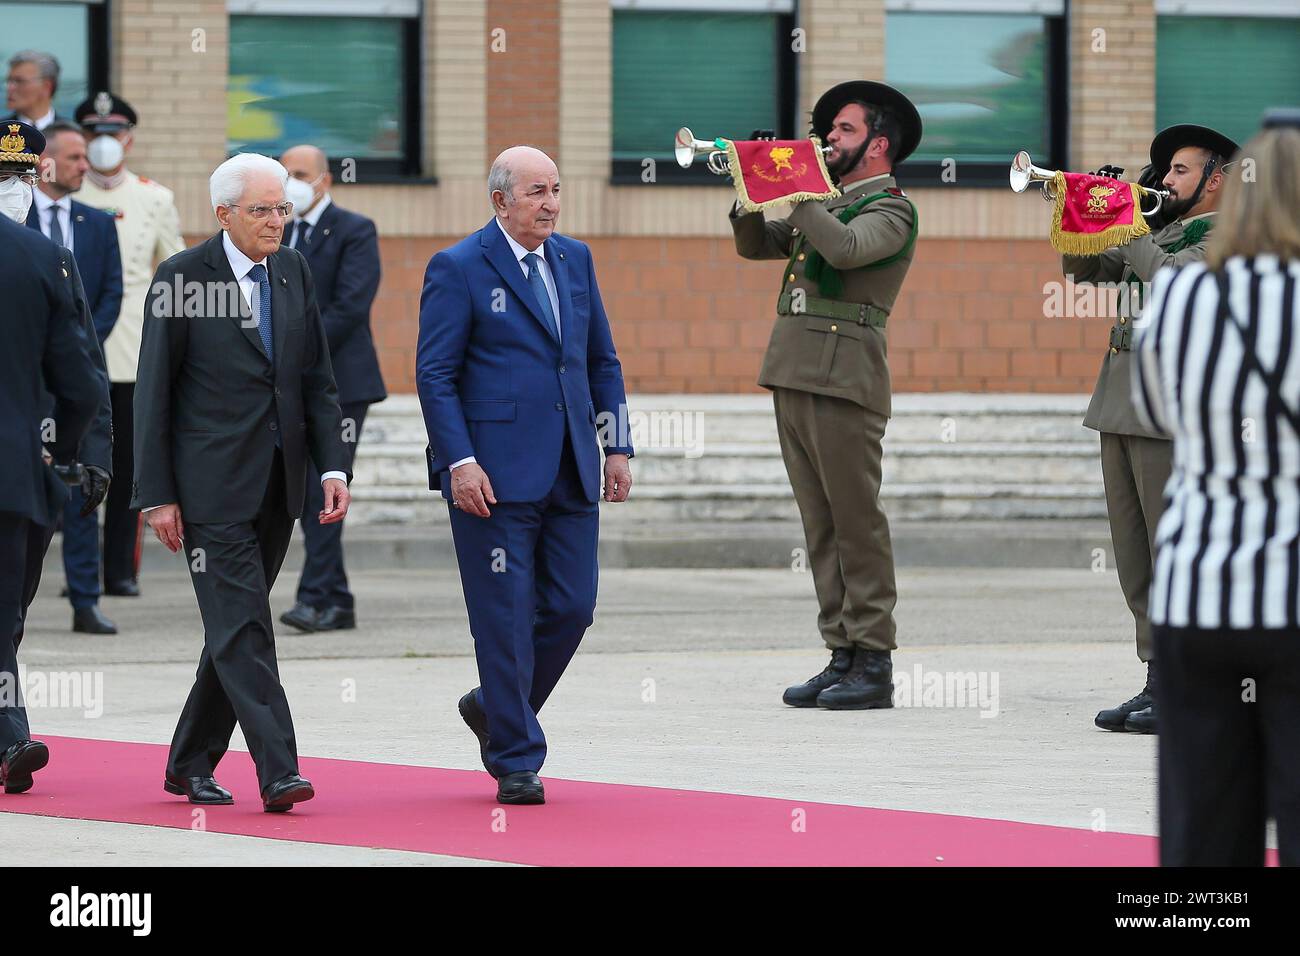 The president of Algeria, Abdelmadjid (right) Tebboune, departing from Naples, arrives at the Capodichino airport for the military honors, together wi Stock Photo